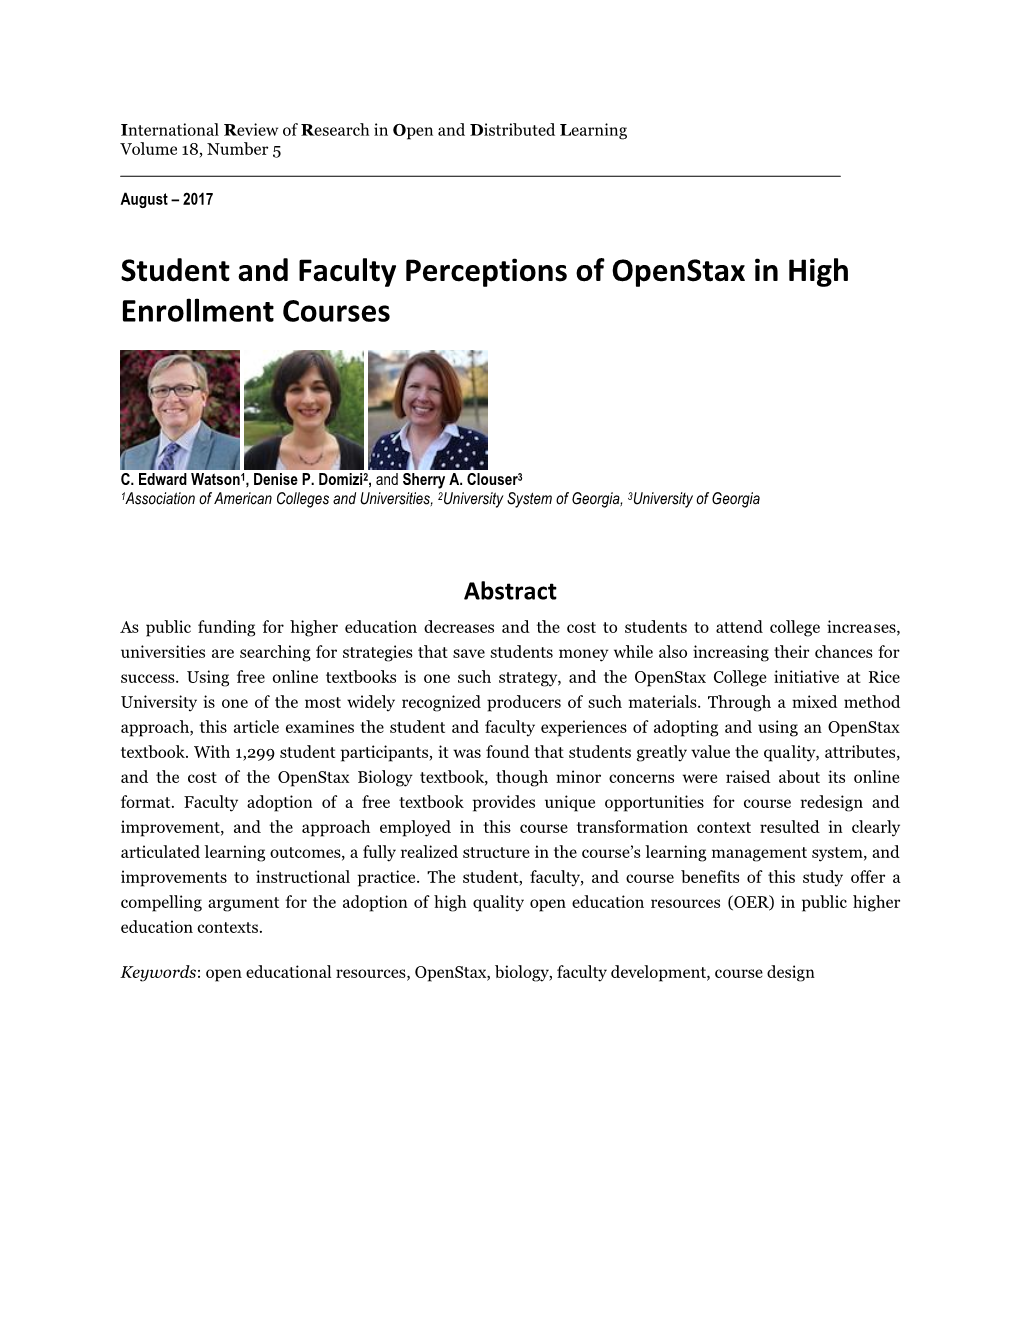 Student and Faculty Perceptions of Openstax in High Enrollment Courses